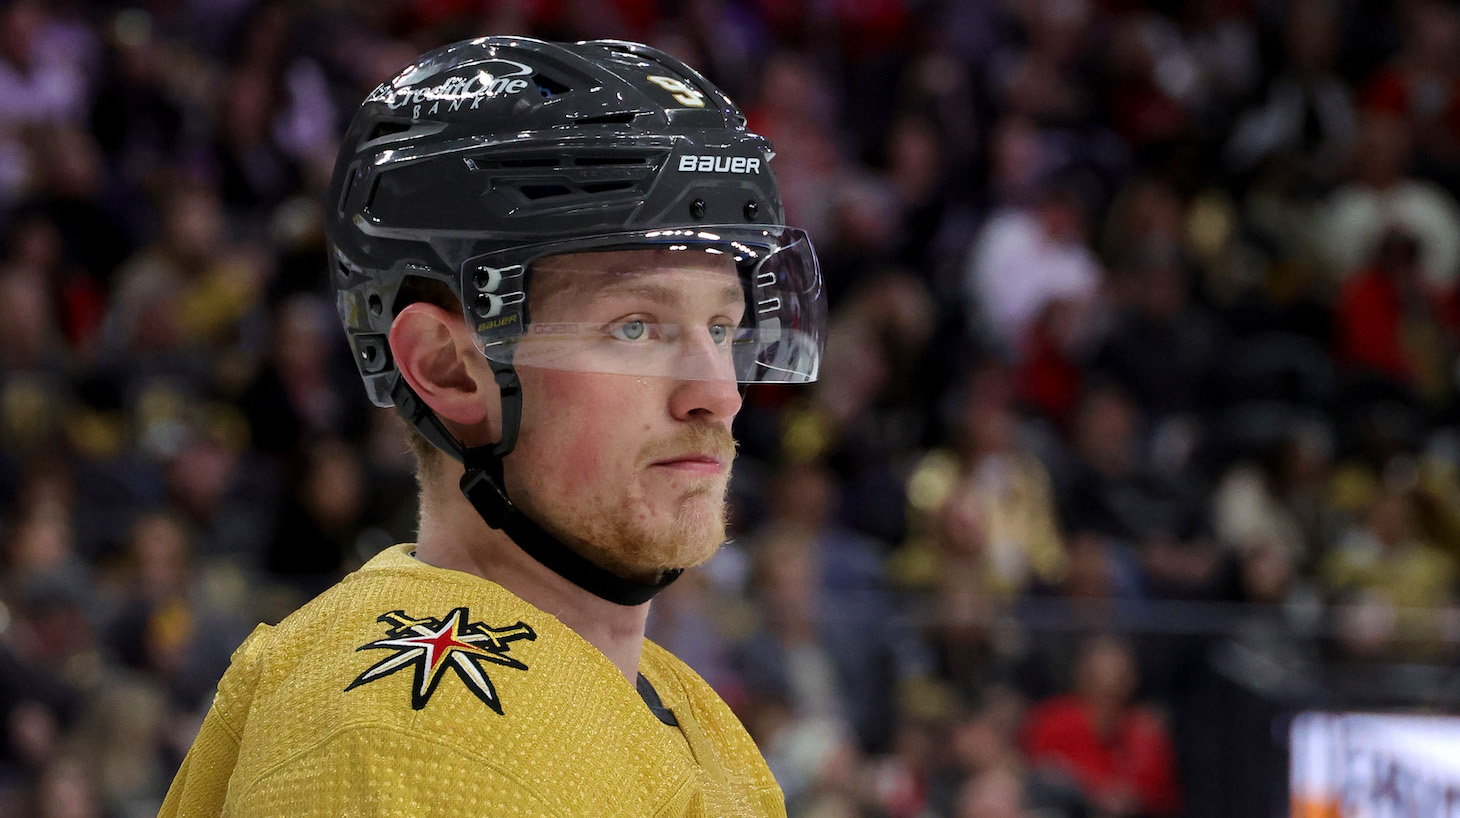 LAS VEGAS, NEVADA - FEBRUARY 18: Jack Eichel #9 of the Vegas Golden Knights takes a break during a stop in play in the third period of a game against the Los Angeles Kings at T-Mobile Arena on February 18, 2022 in Las Vegas, Nevada. The Kings defeated the Golden Knights 4-3 in overtime. (Photo by Ethan Miller/Getty Images)